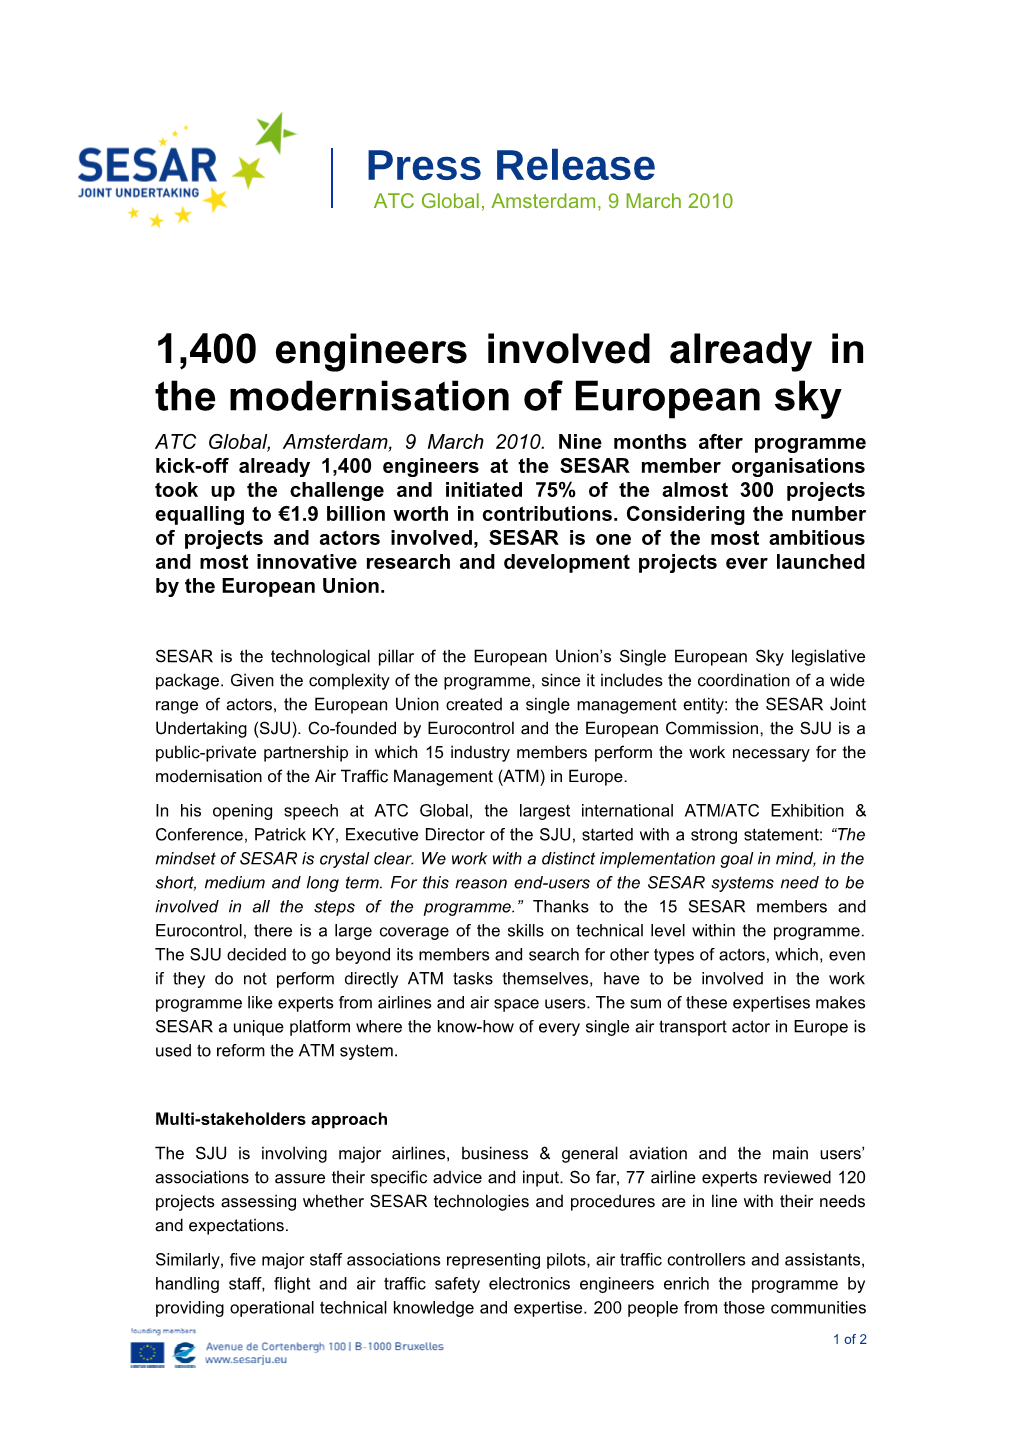 1,400 Engineers Involved Already in the Modernisation of European Sky